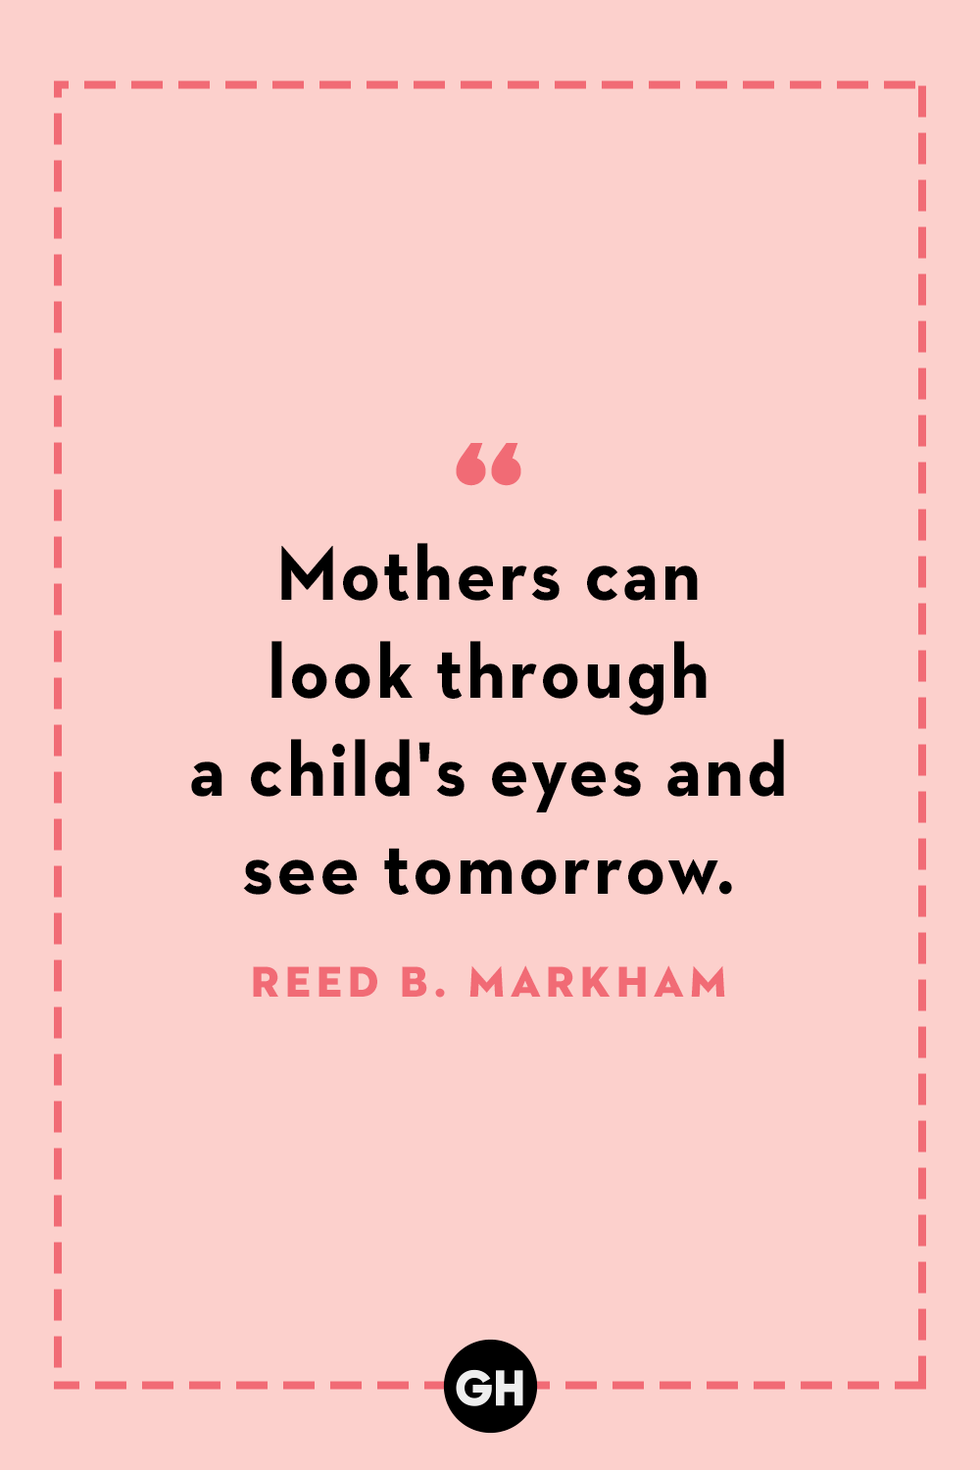 150 New Mom Quotes To Celebrate Becoming a Mother - Parade